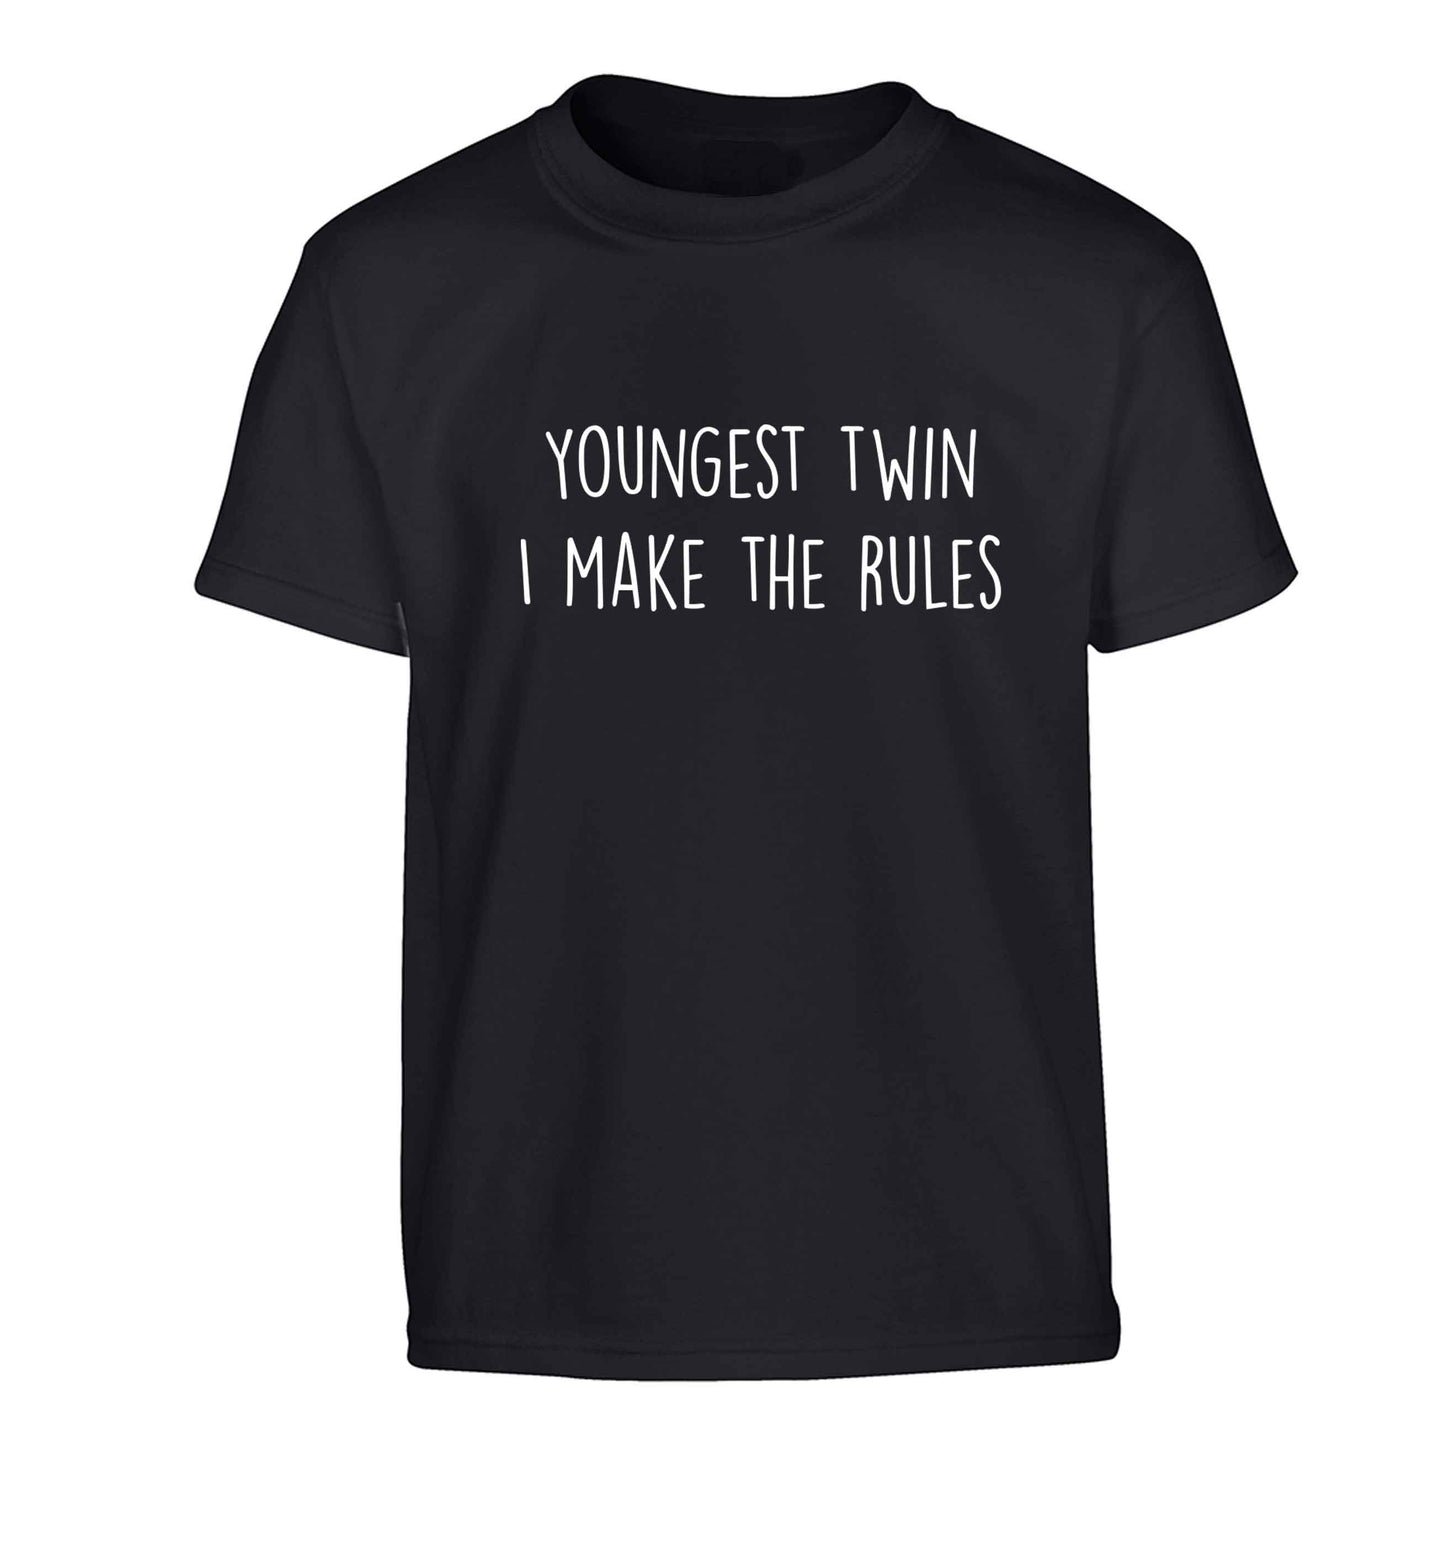 Youngest twin I make the rules Children's black Tshirt 12-13 Years